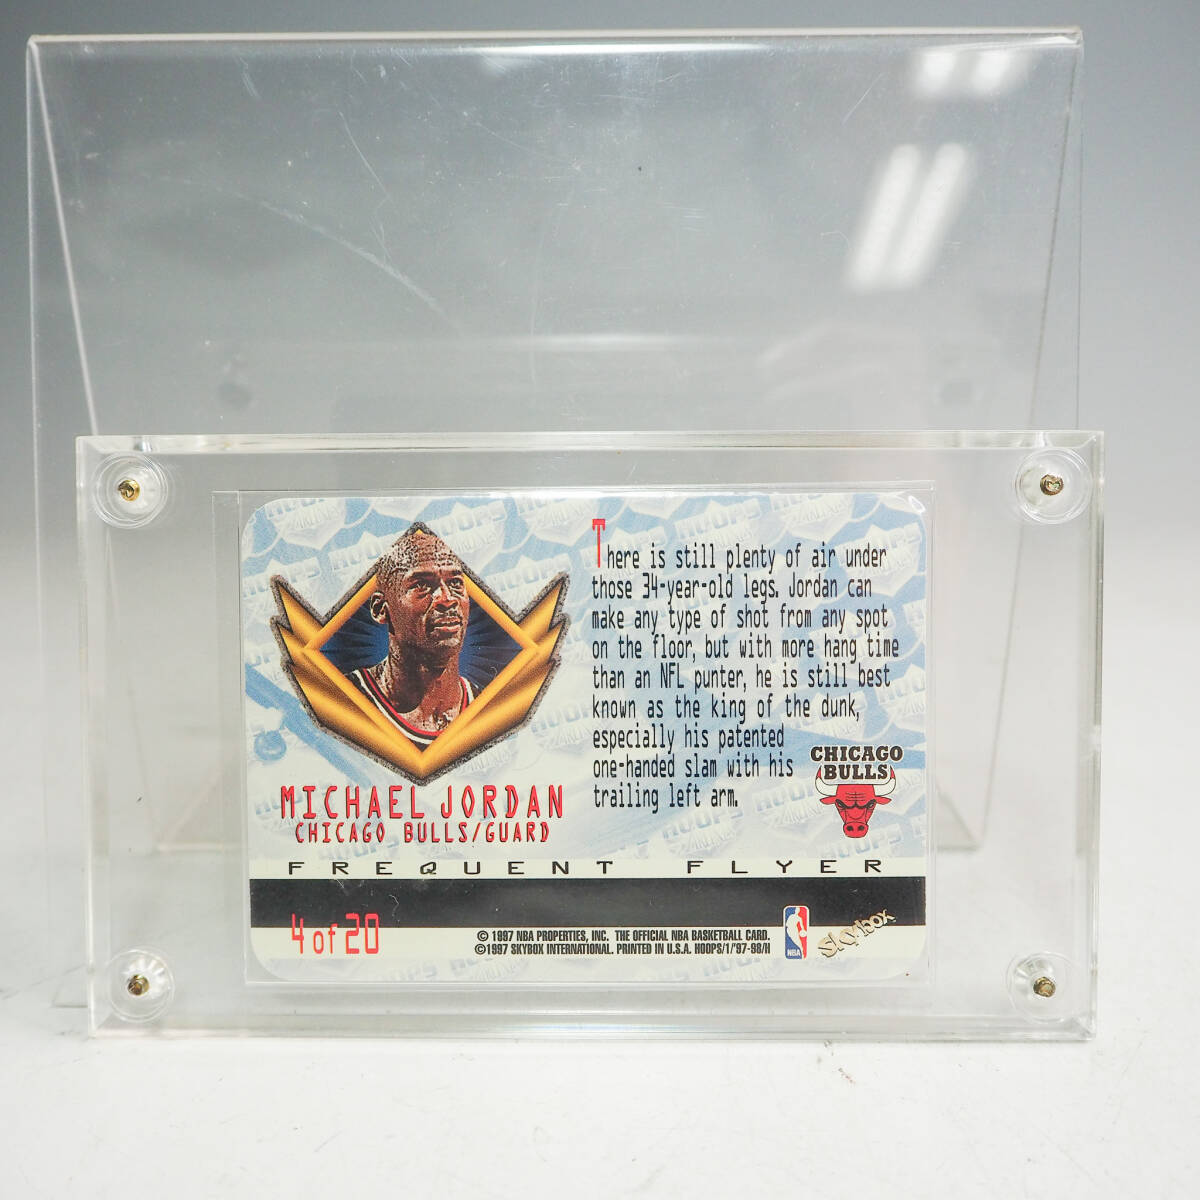 NBA HOOPS 1997 Michael Jordan マイケルジョーダン HOOPS AIRLINES FREQUENT FLYER カード グッズ コレクション K5250の画像5